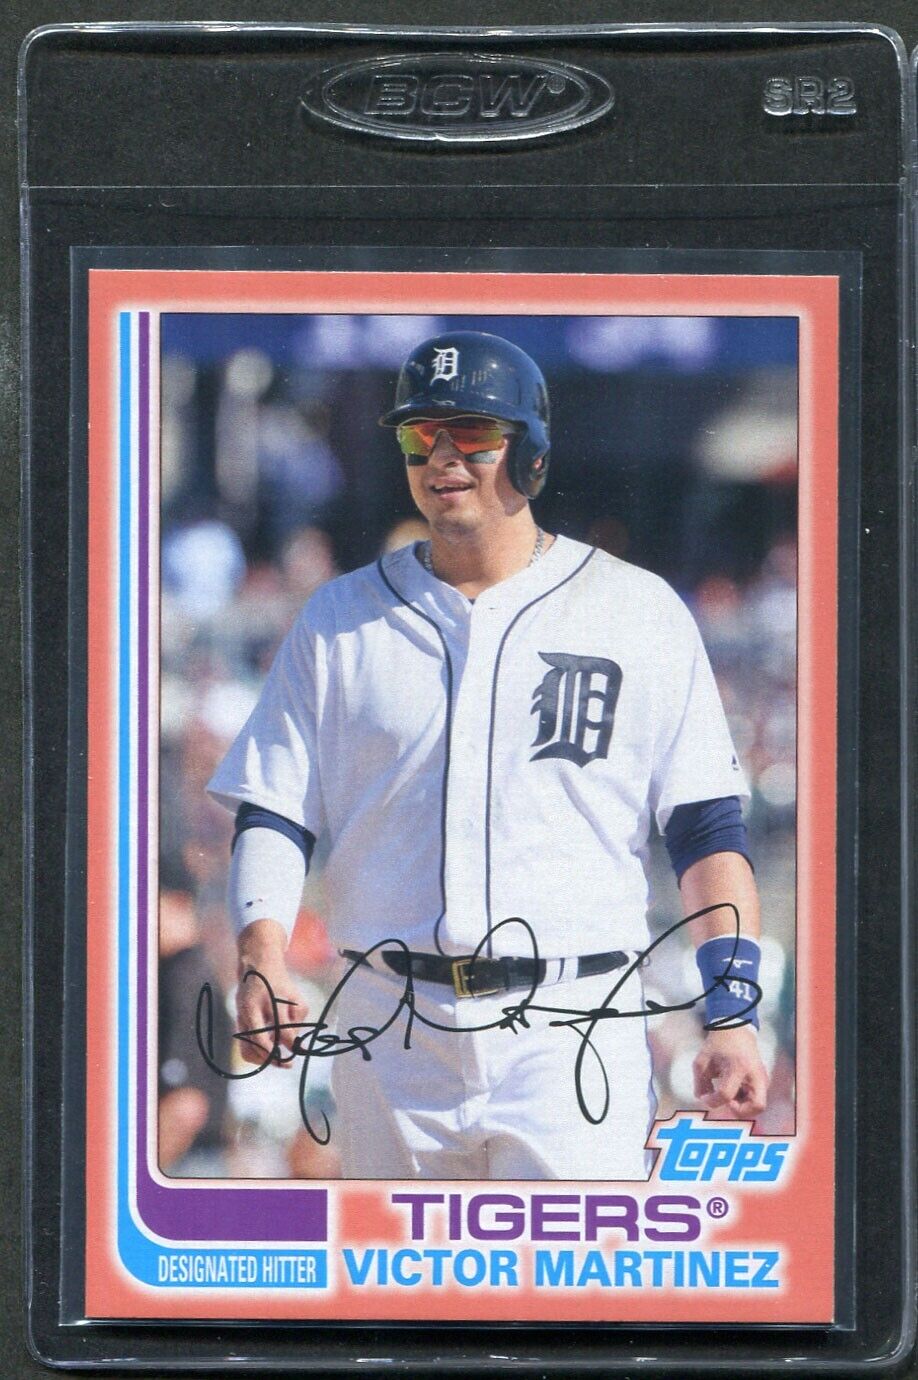 2017 Topps Archives Peach Victor Martinez #152 Tigers /199